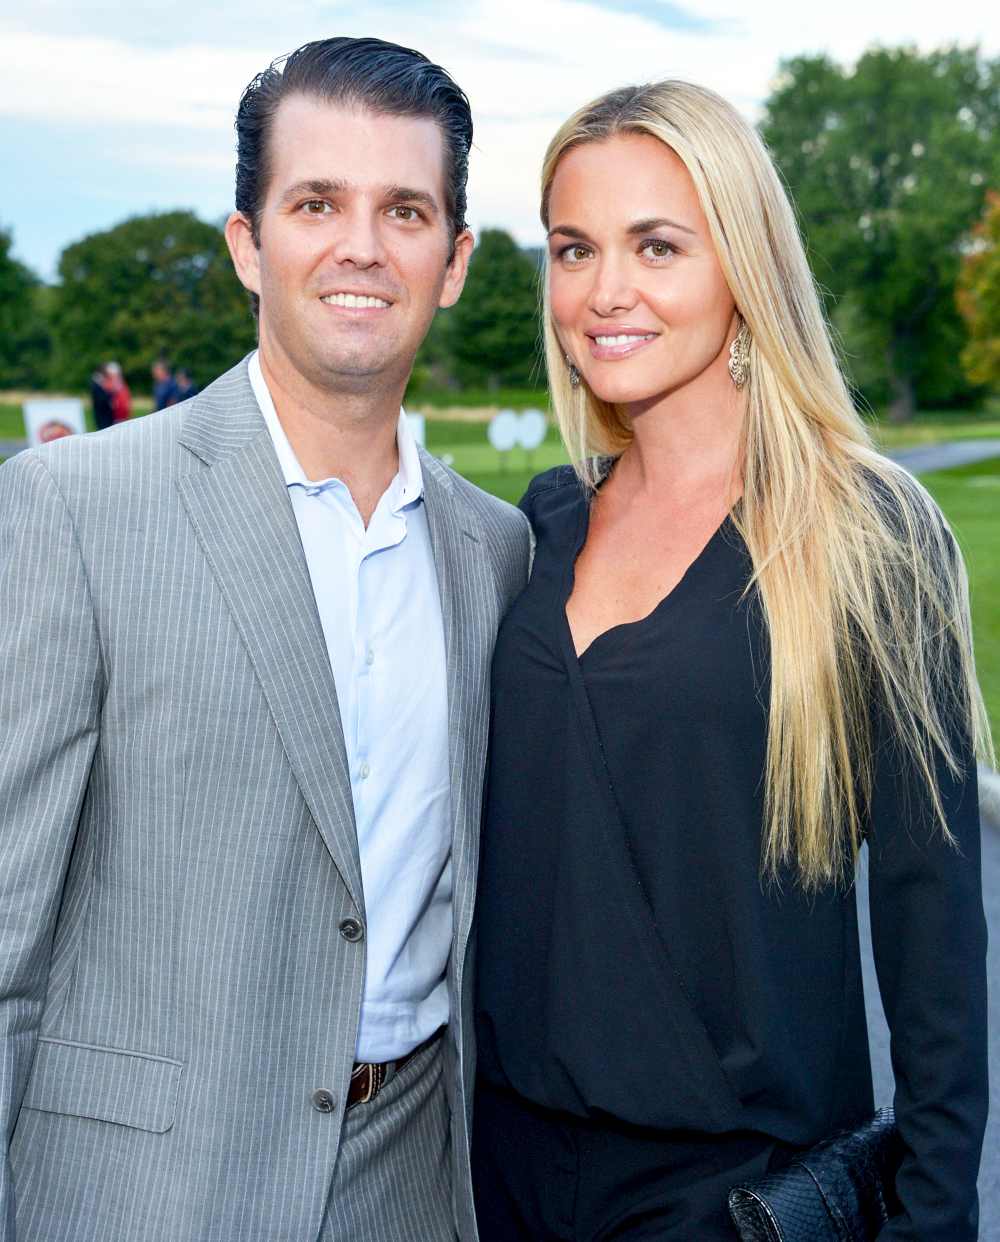 Donald Trump Jr. and Vanessa Trump attend the 9th Annual Eric Trump Foundation Golf Invitational Auction & Dinner at Trump National Golf Club Westchester in Briarcliff Manor, New York.